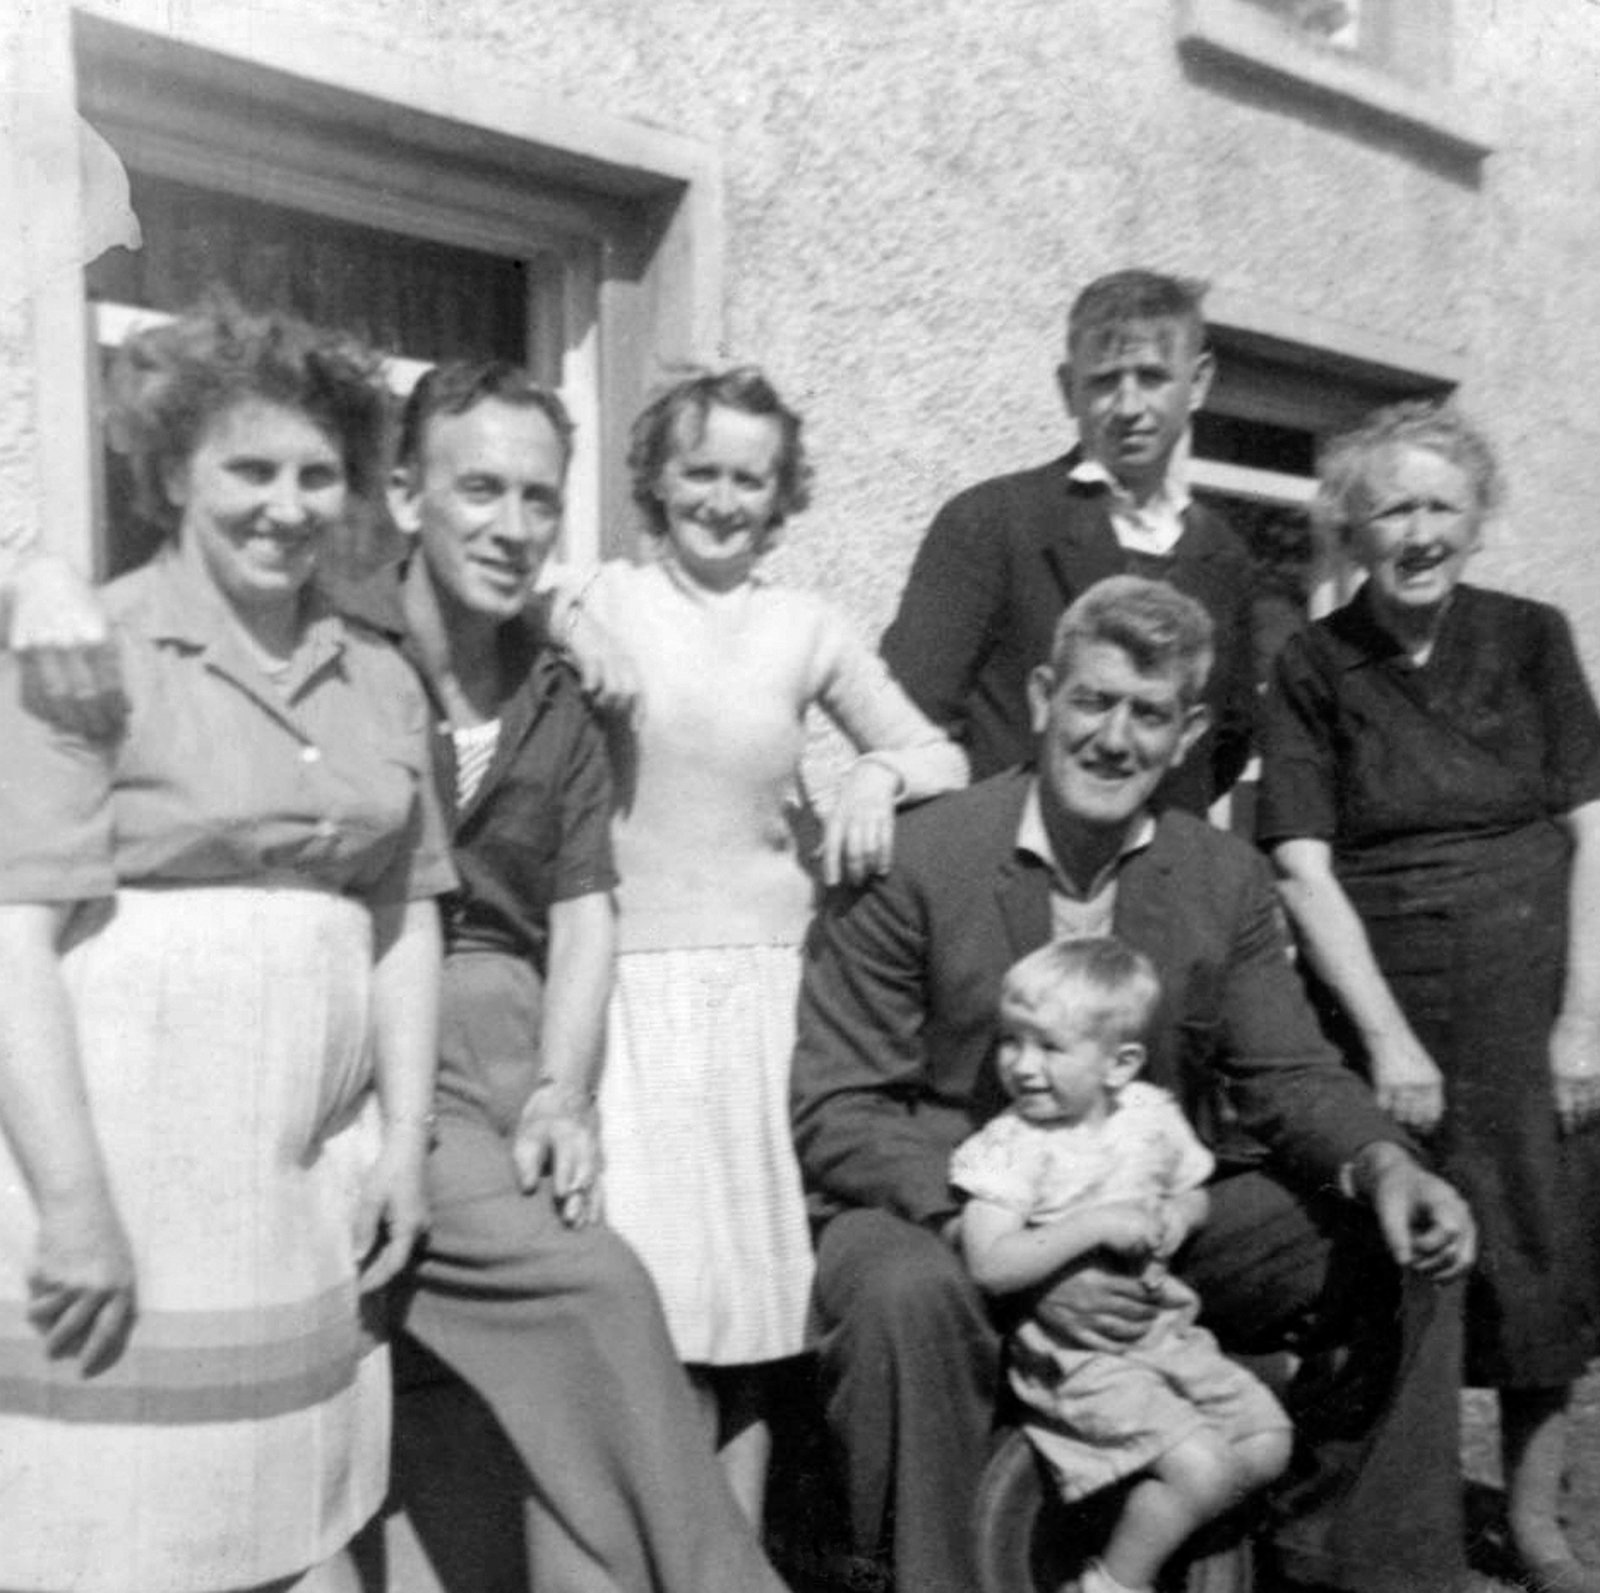 Aunt Molly and Uncle Paddy (visiting from London), Mum, Dad (holding Michael), Uncle Jim, and maternal grandmother outside her home in County Derry, 1961.